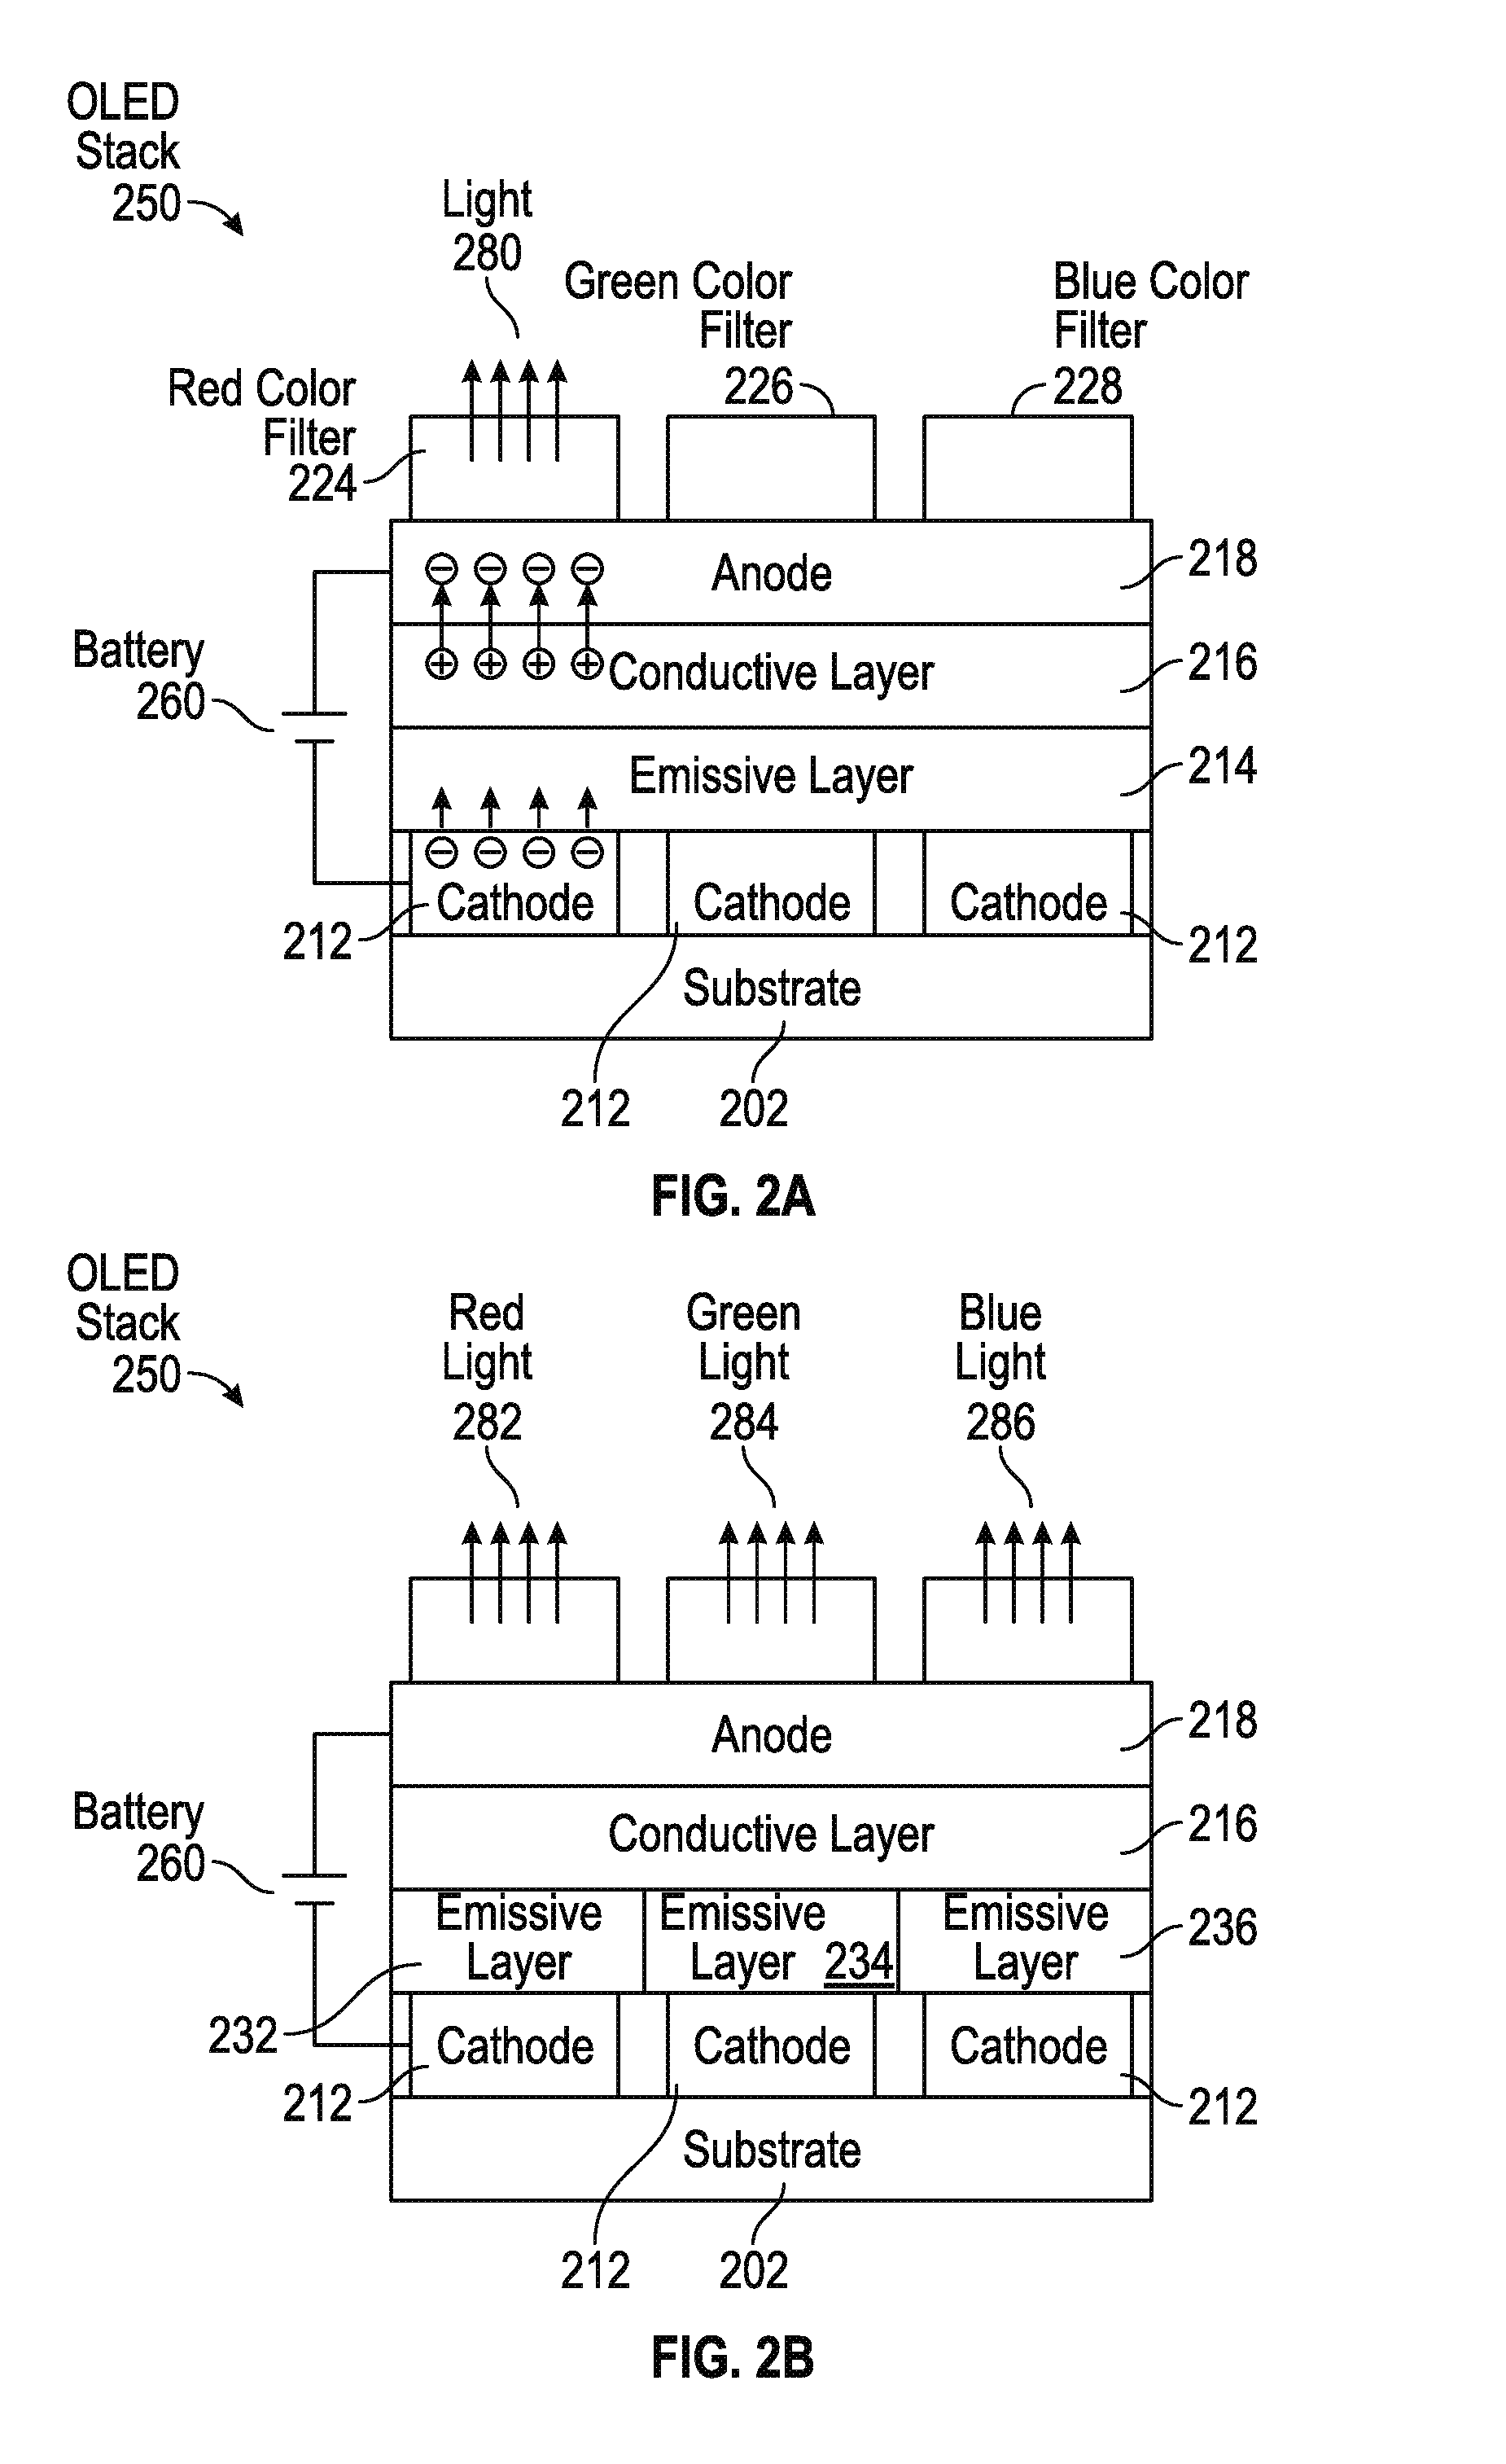 Integrated silicon-oled display and touch sensor panel